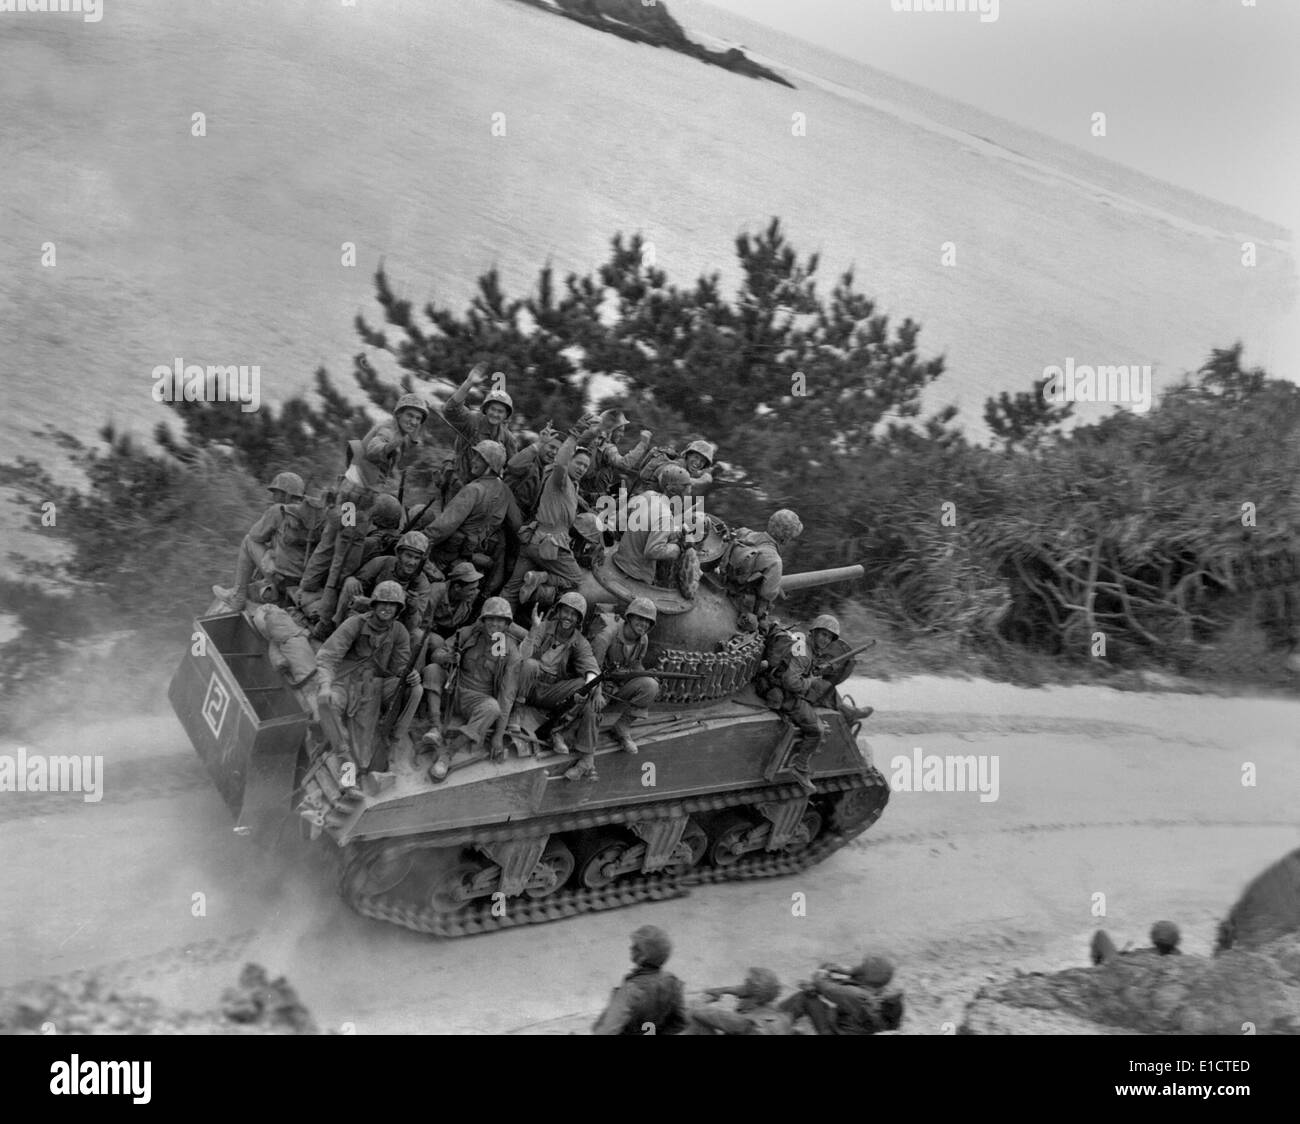 Soldiers of the 29th Marines on a Sherman tank on the first day of the invasion of Okinawa. April 1, 1945. They are advancing Stock Photo